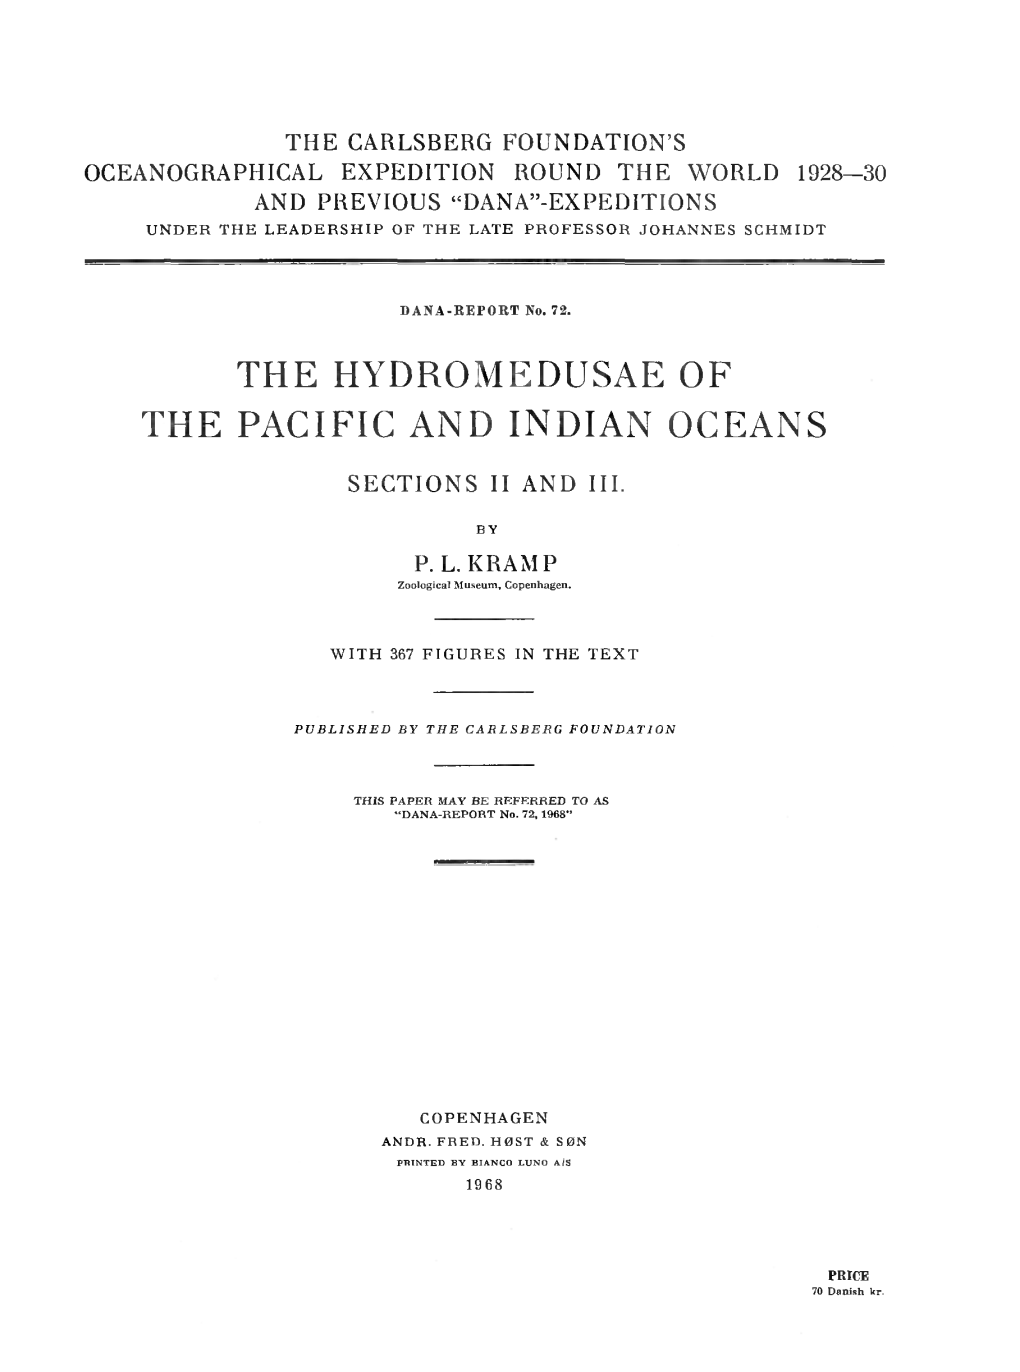 The Hydromedusae of the Pacific and Indian Oceans